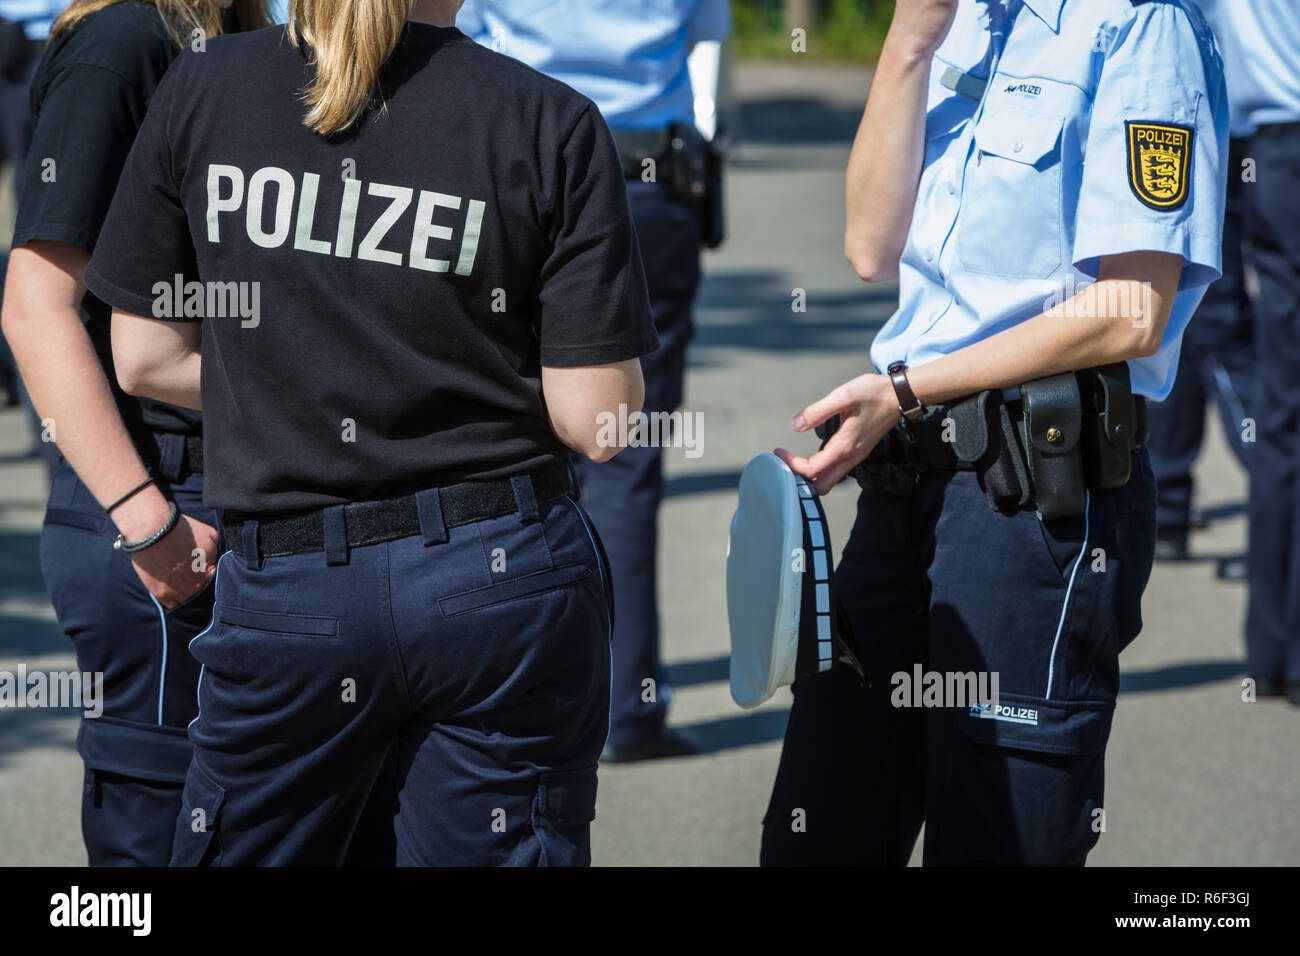 police uniforms in detail Stock Photo